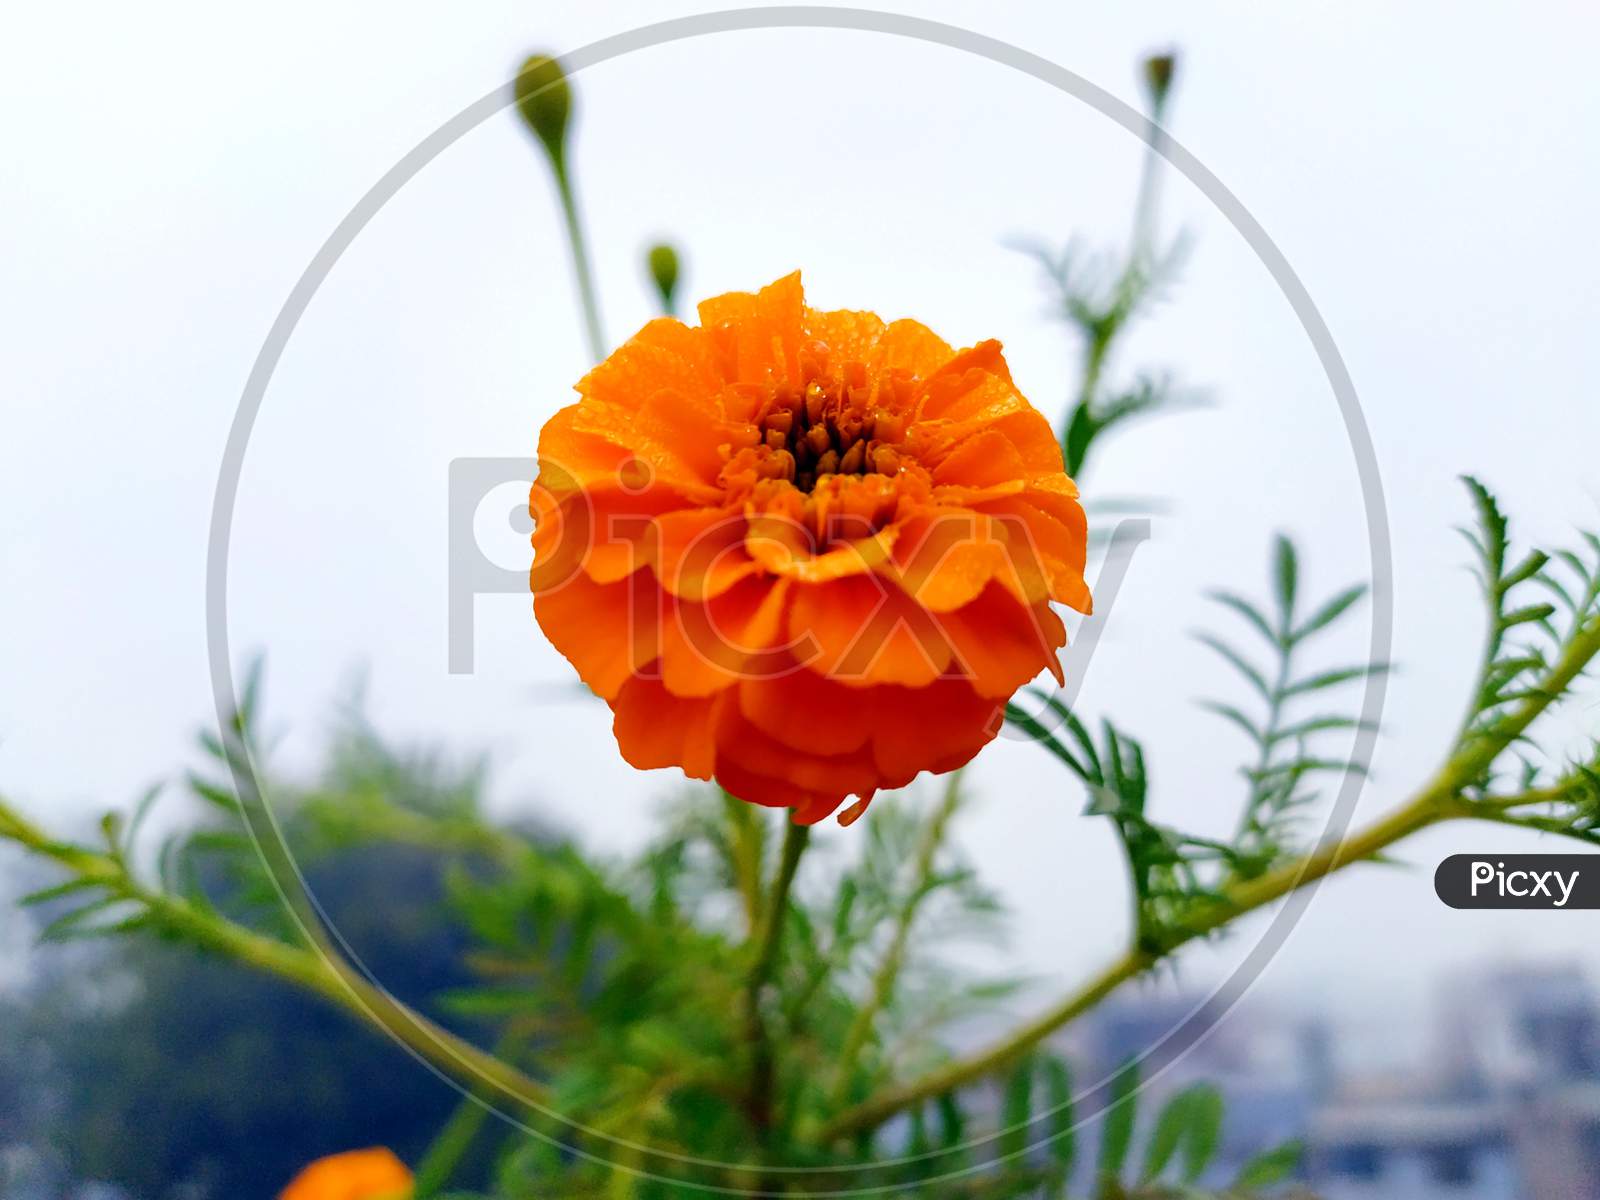 beautiful Yellow and orange marigold flowers (tagetes) in bloom